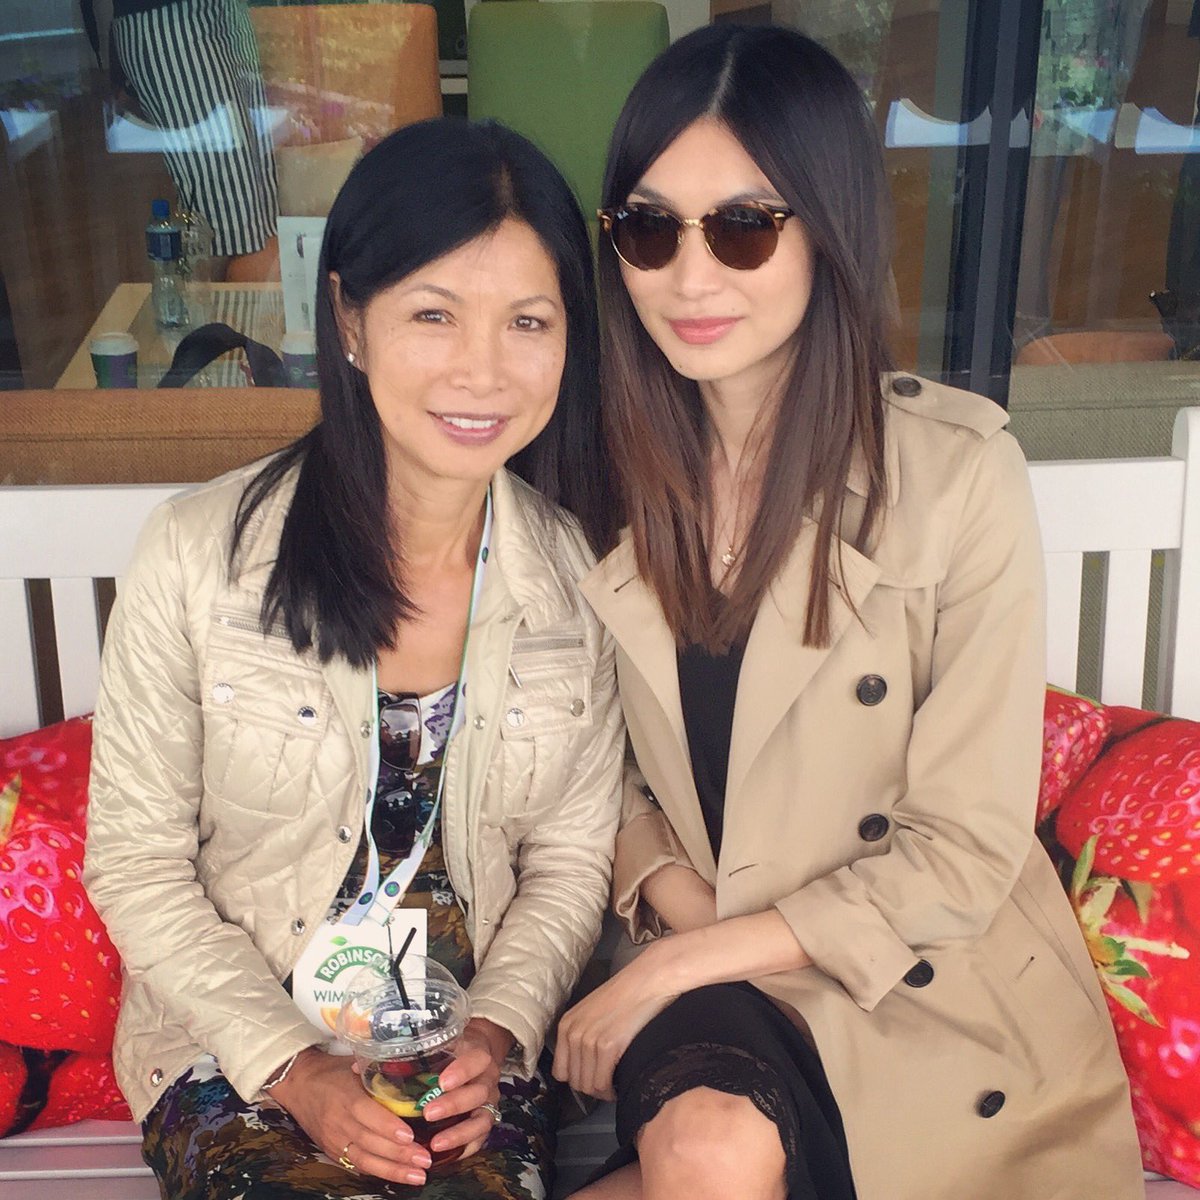 Gemma Chan on Twitter: "With my mama at the tennis ...